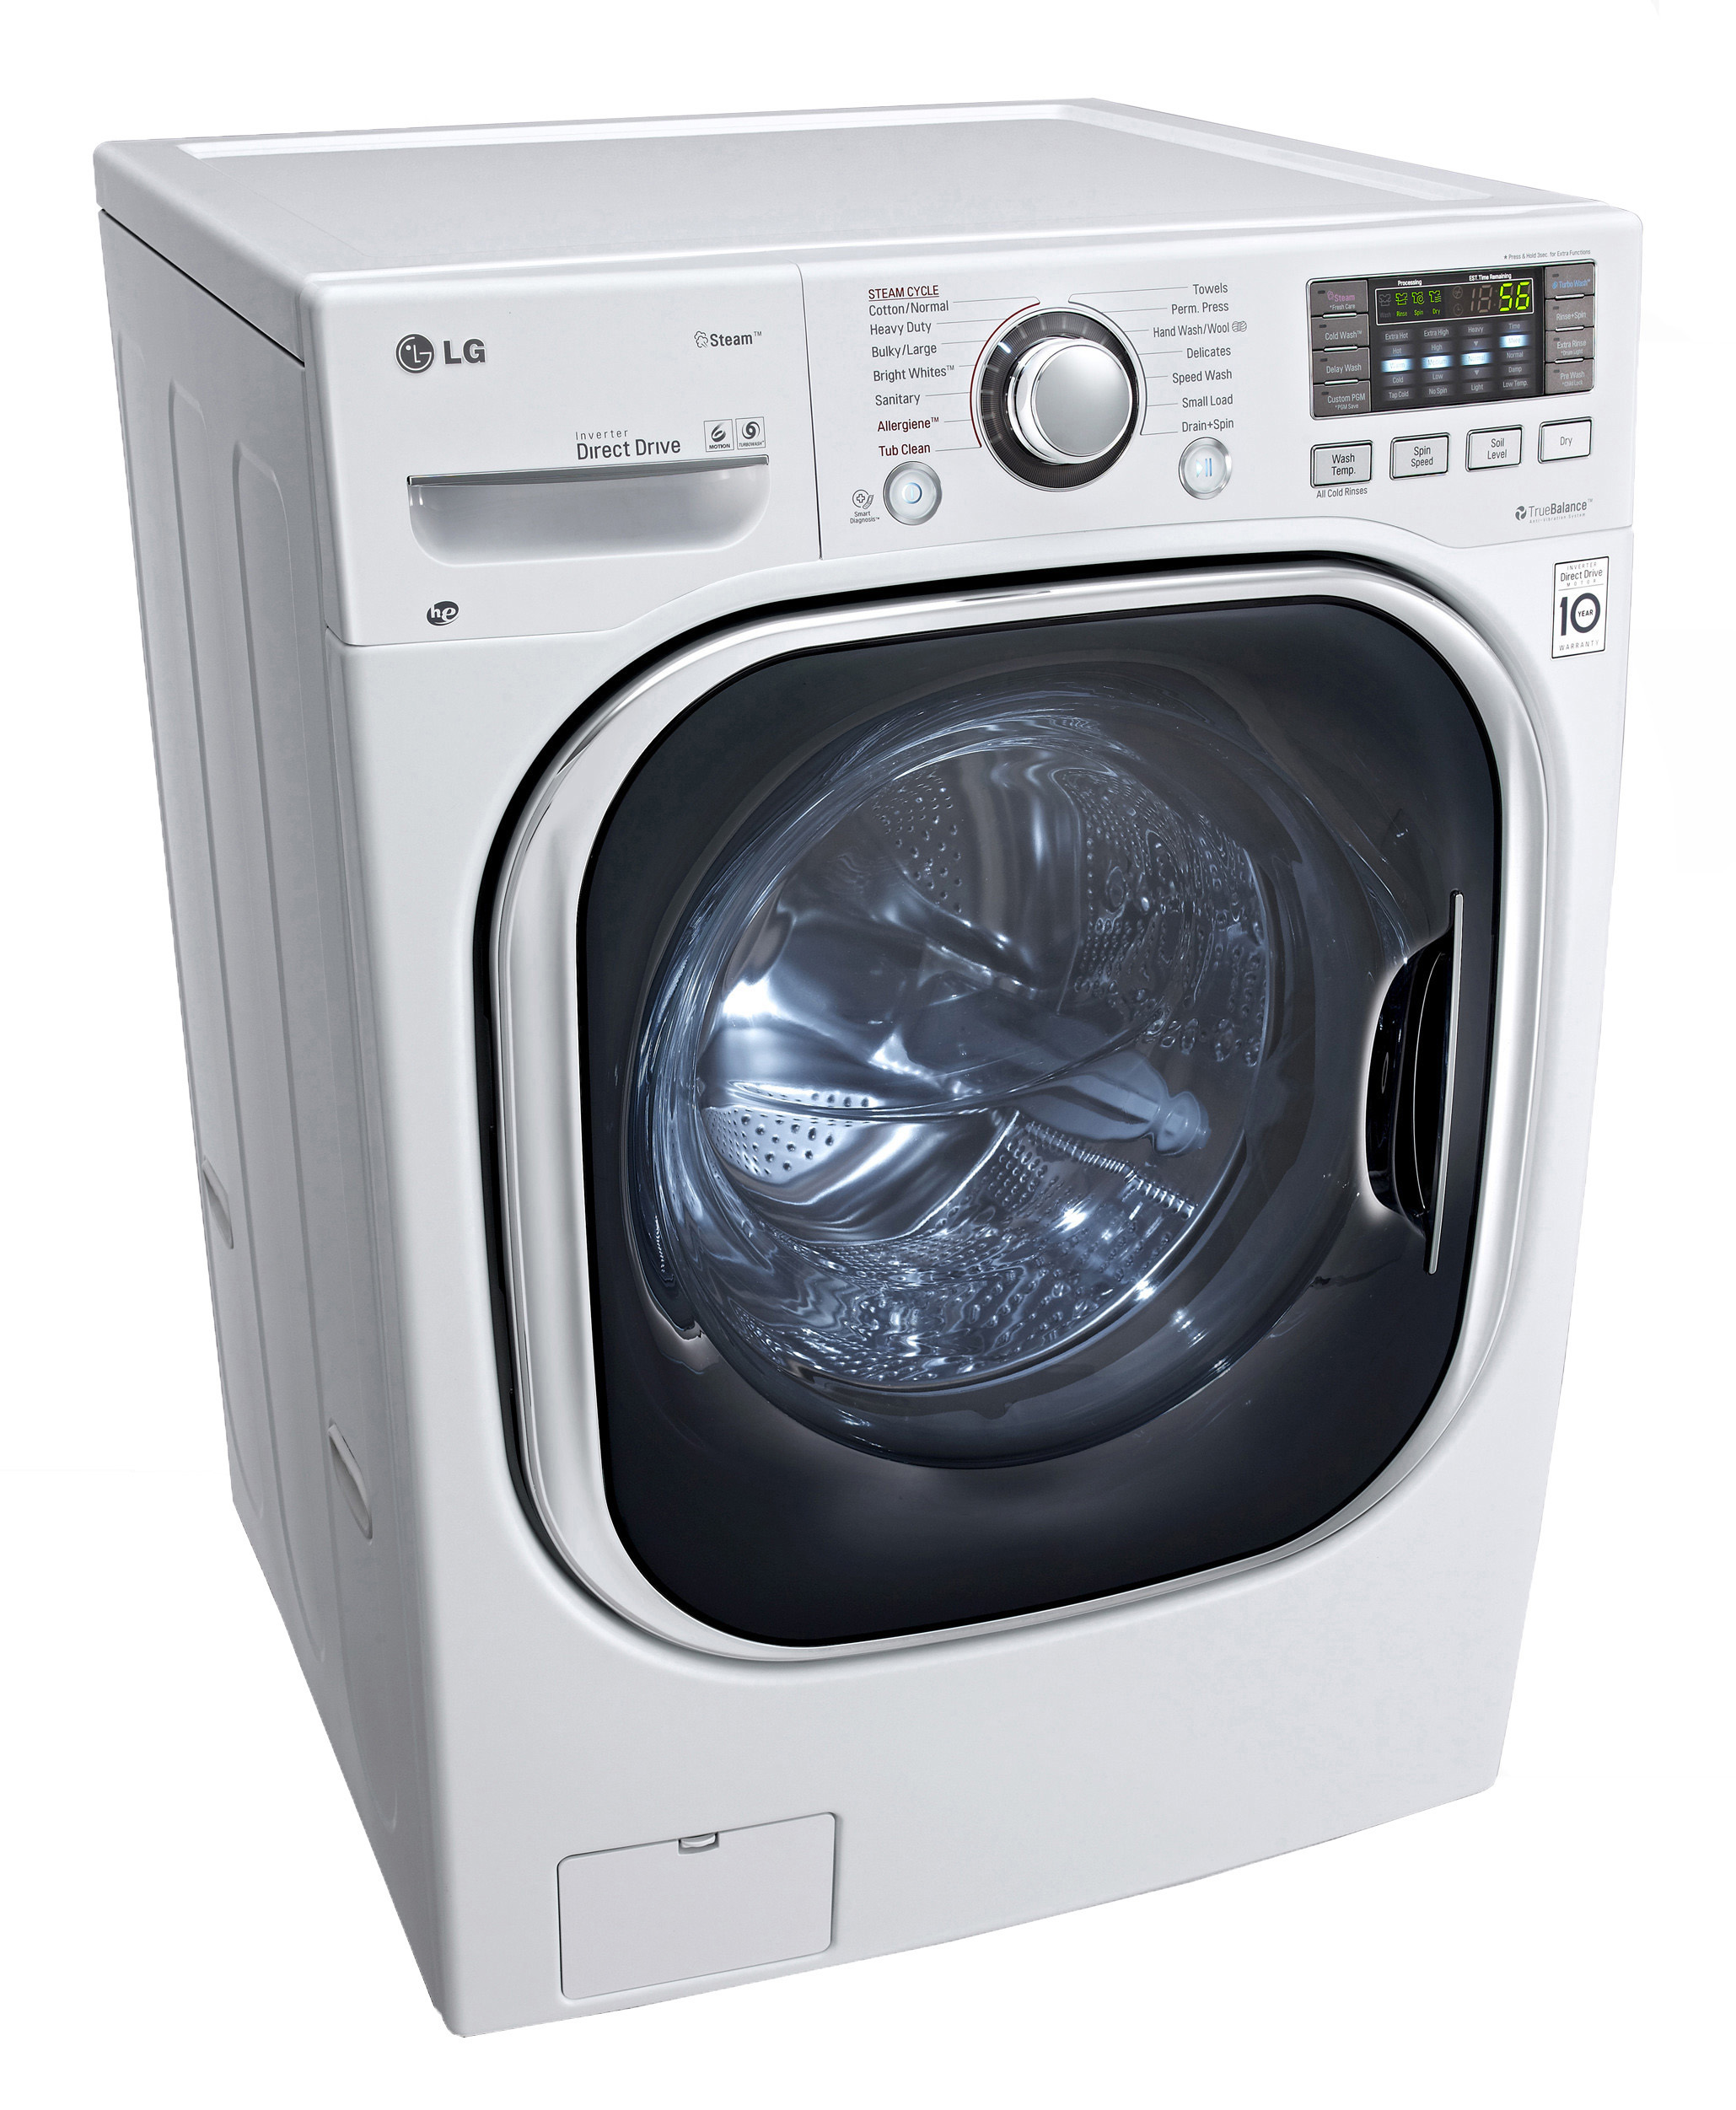 Washer And Dryers: May 2015